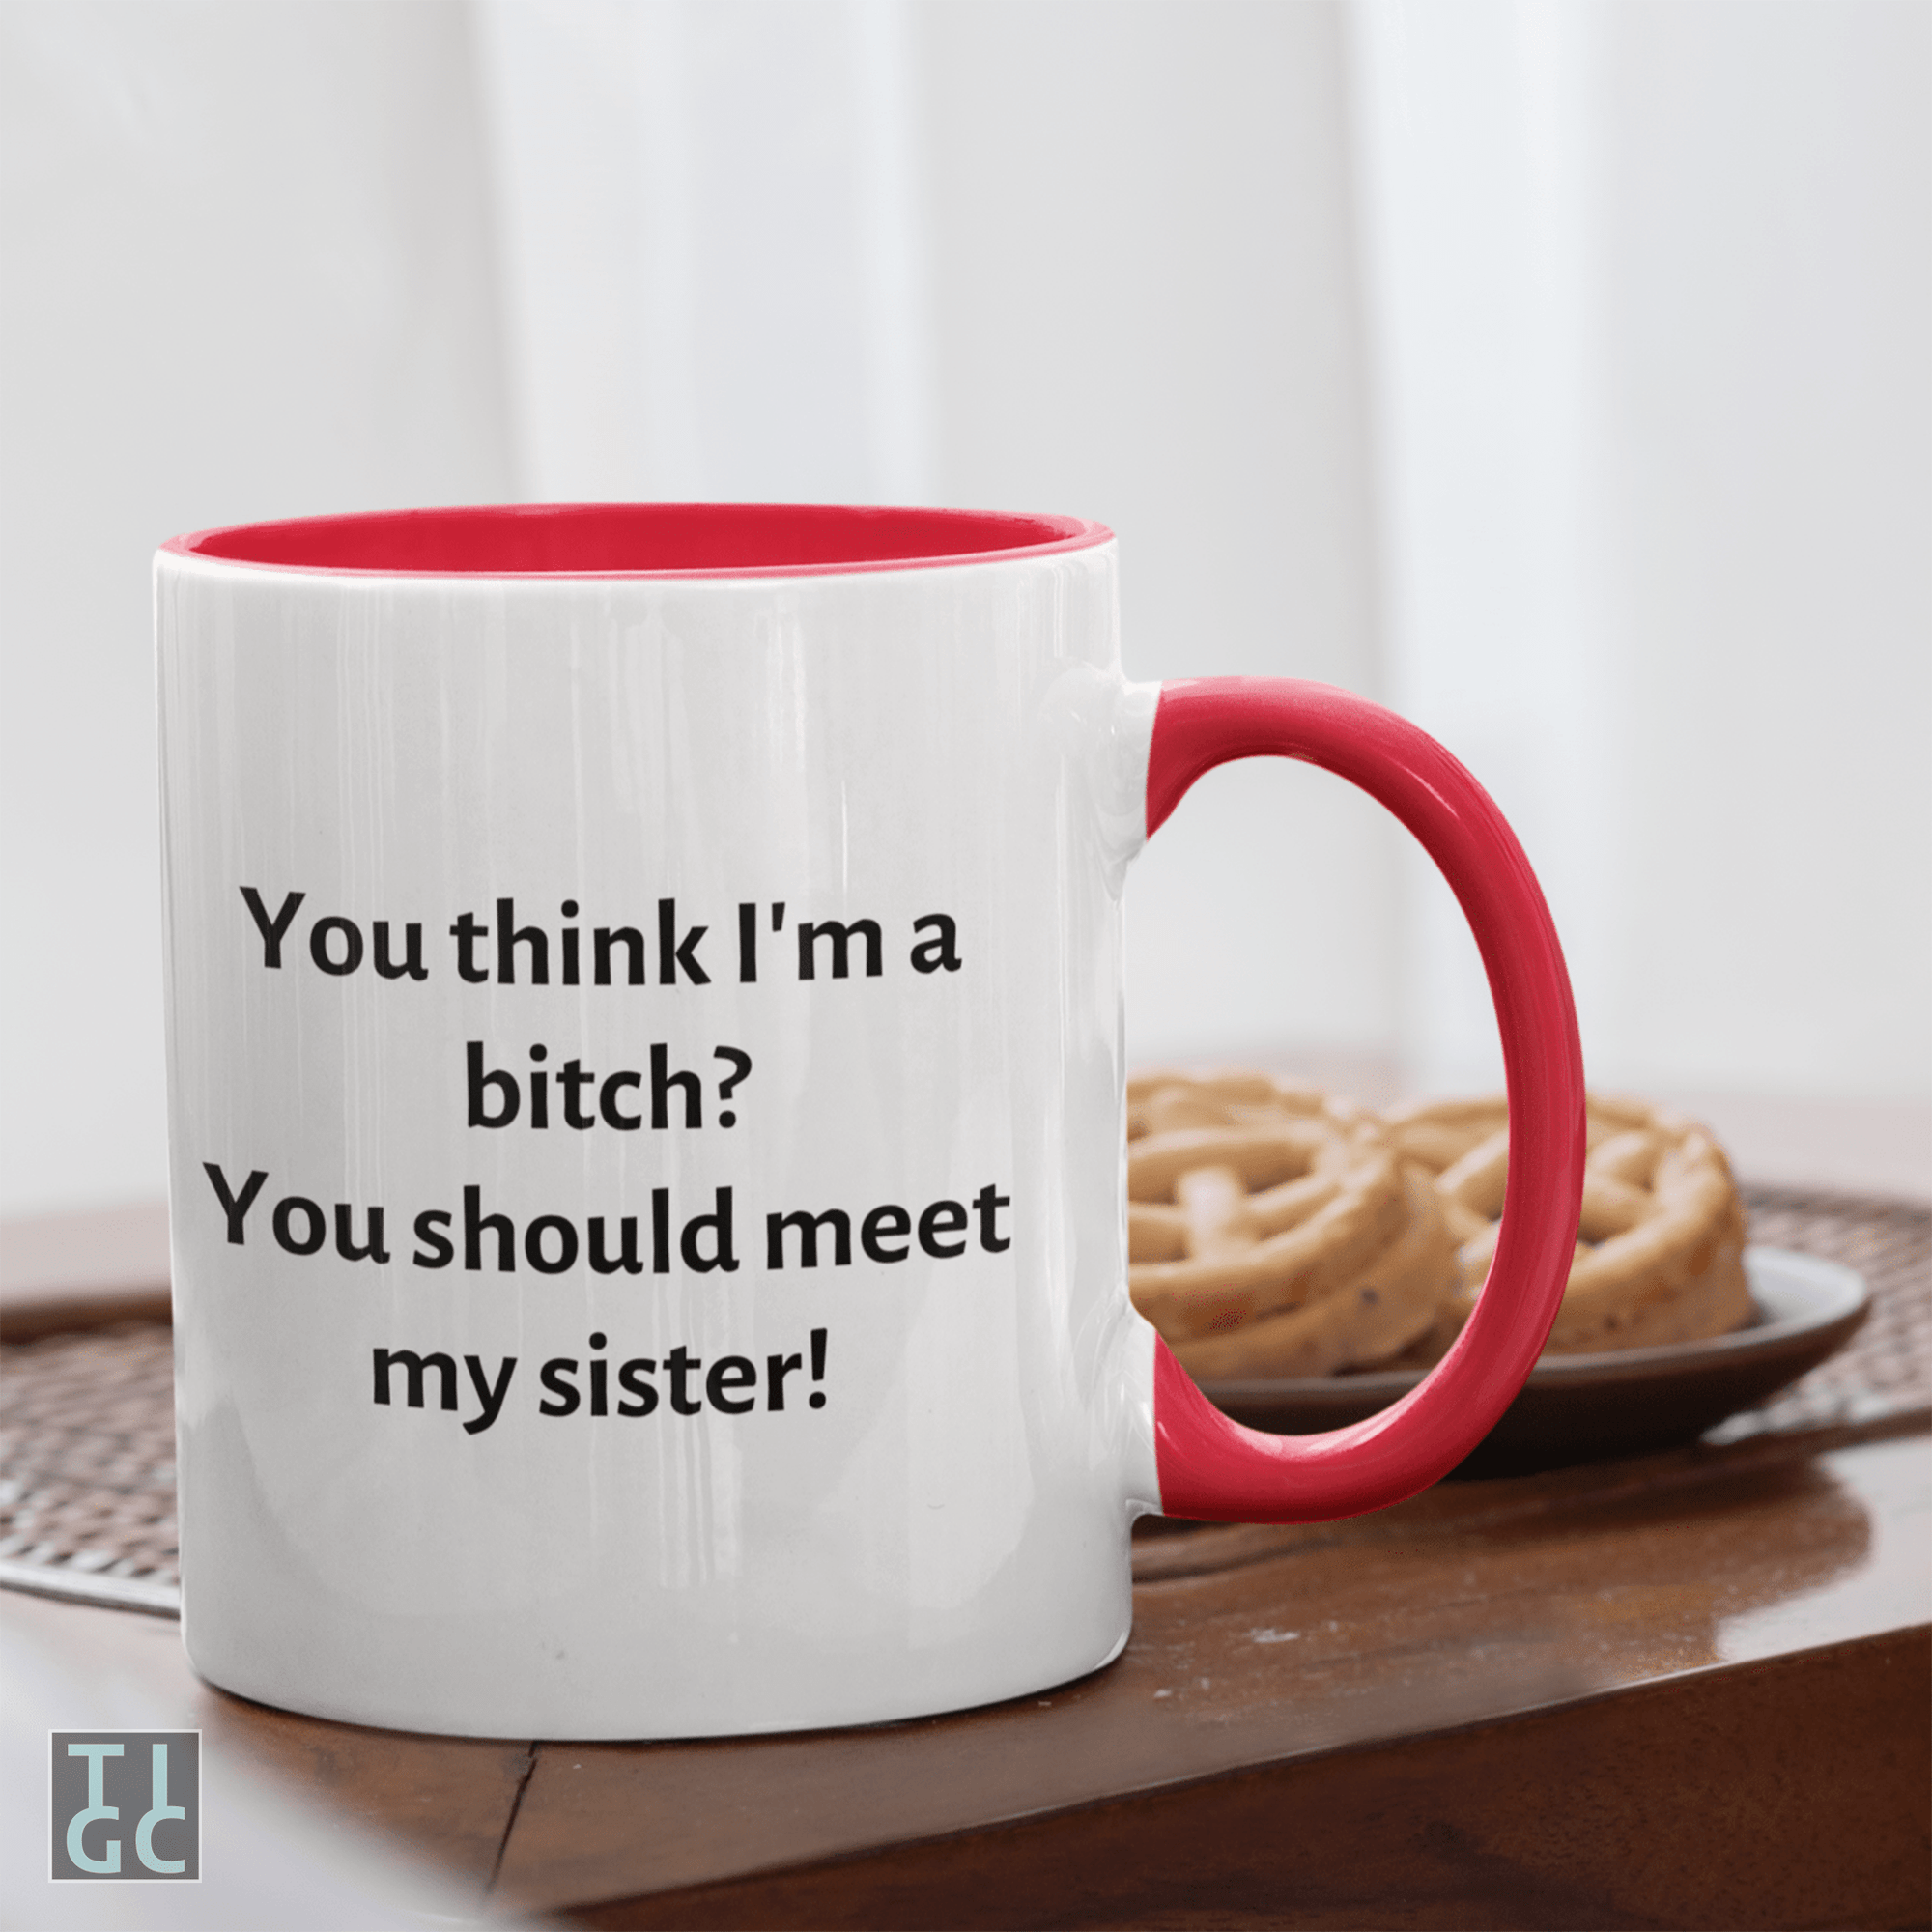 TIGC The Inappropriate Gift Co You think I'm a bitch you should meet my sister mug